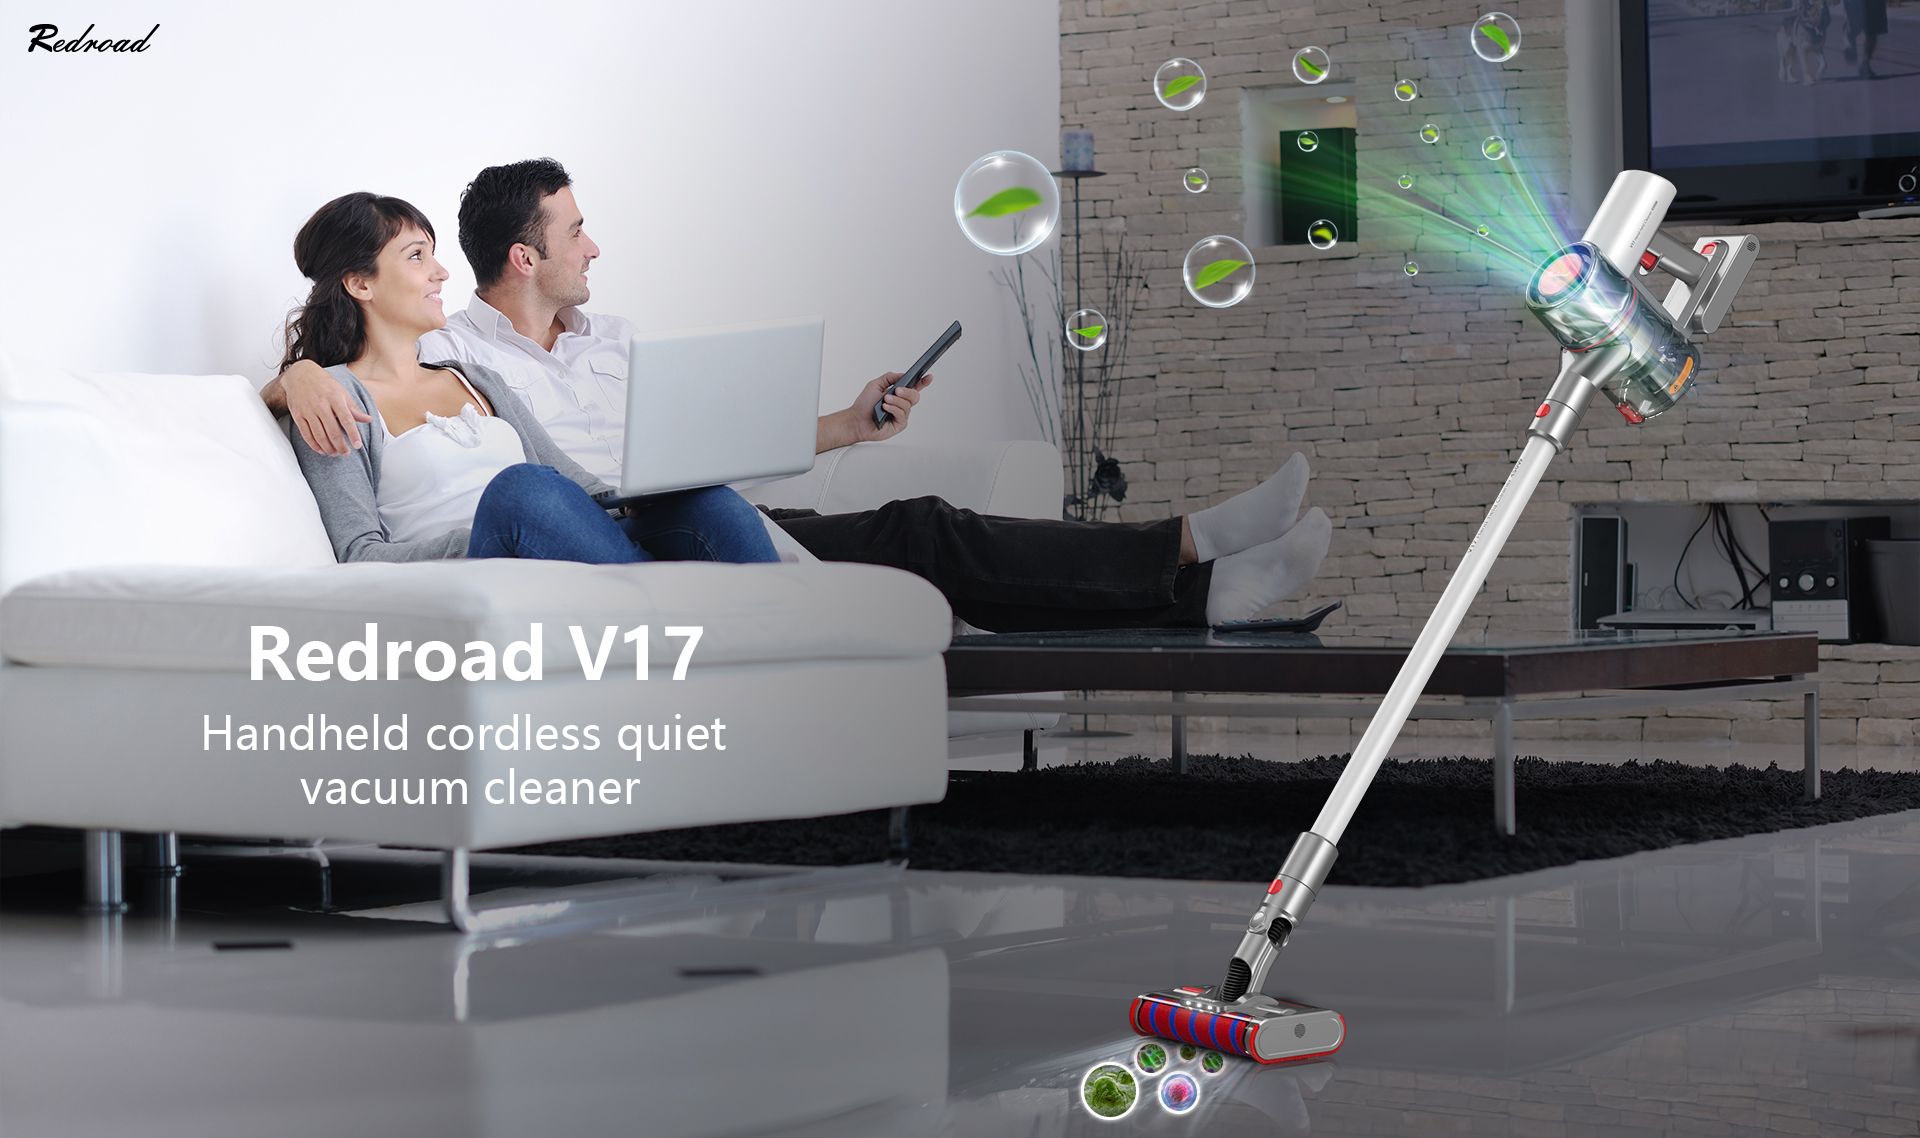 How much of the advertisement can we trust? A review on double-roller brush cordless vacuum cleaner Redroad V17